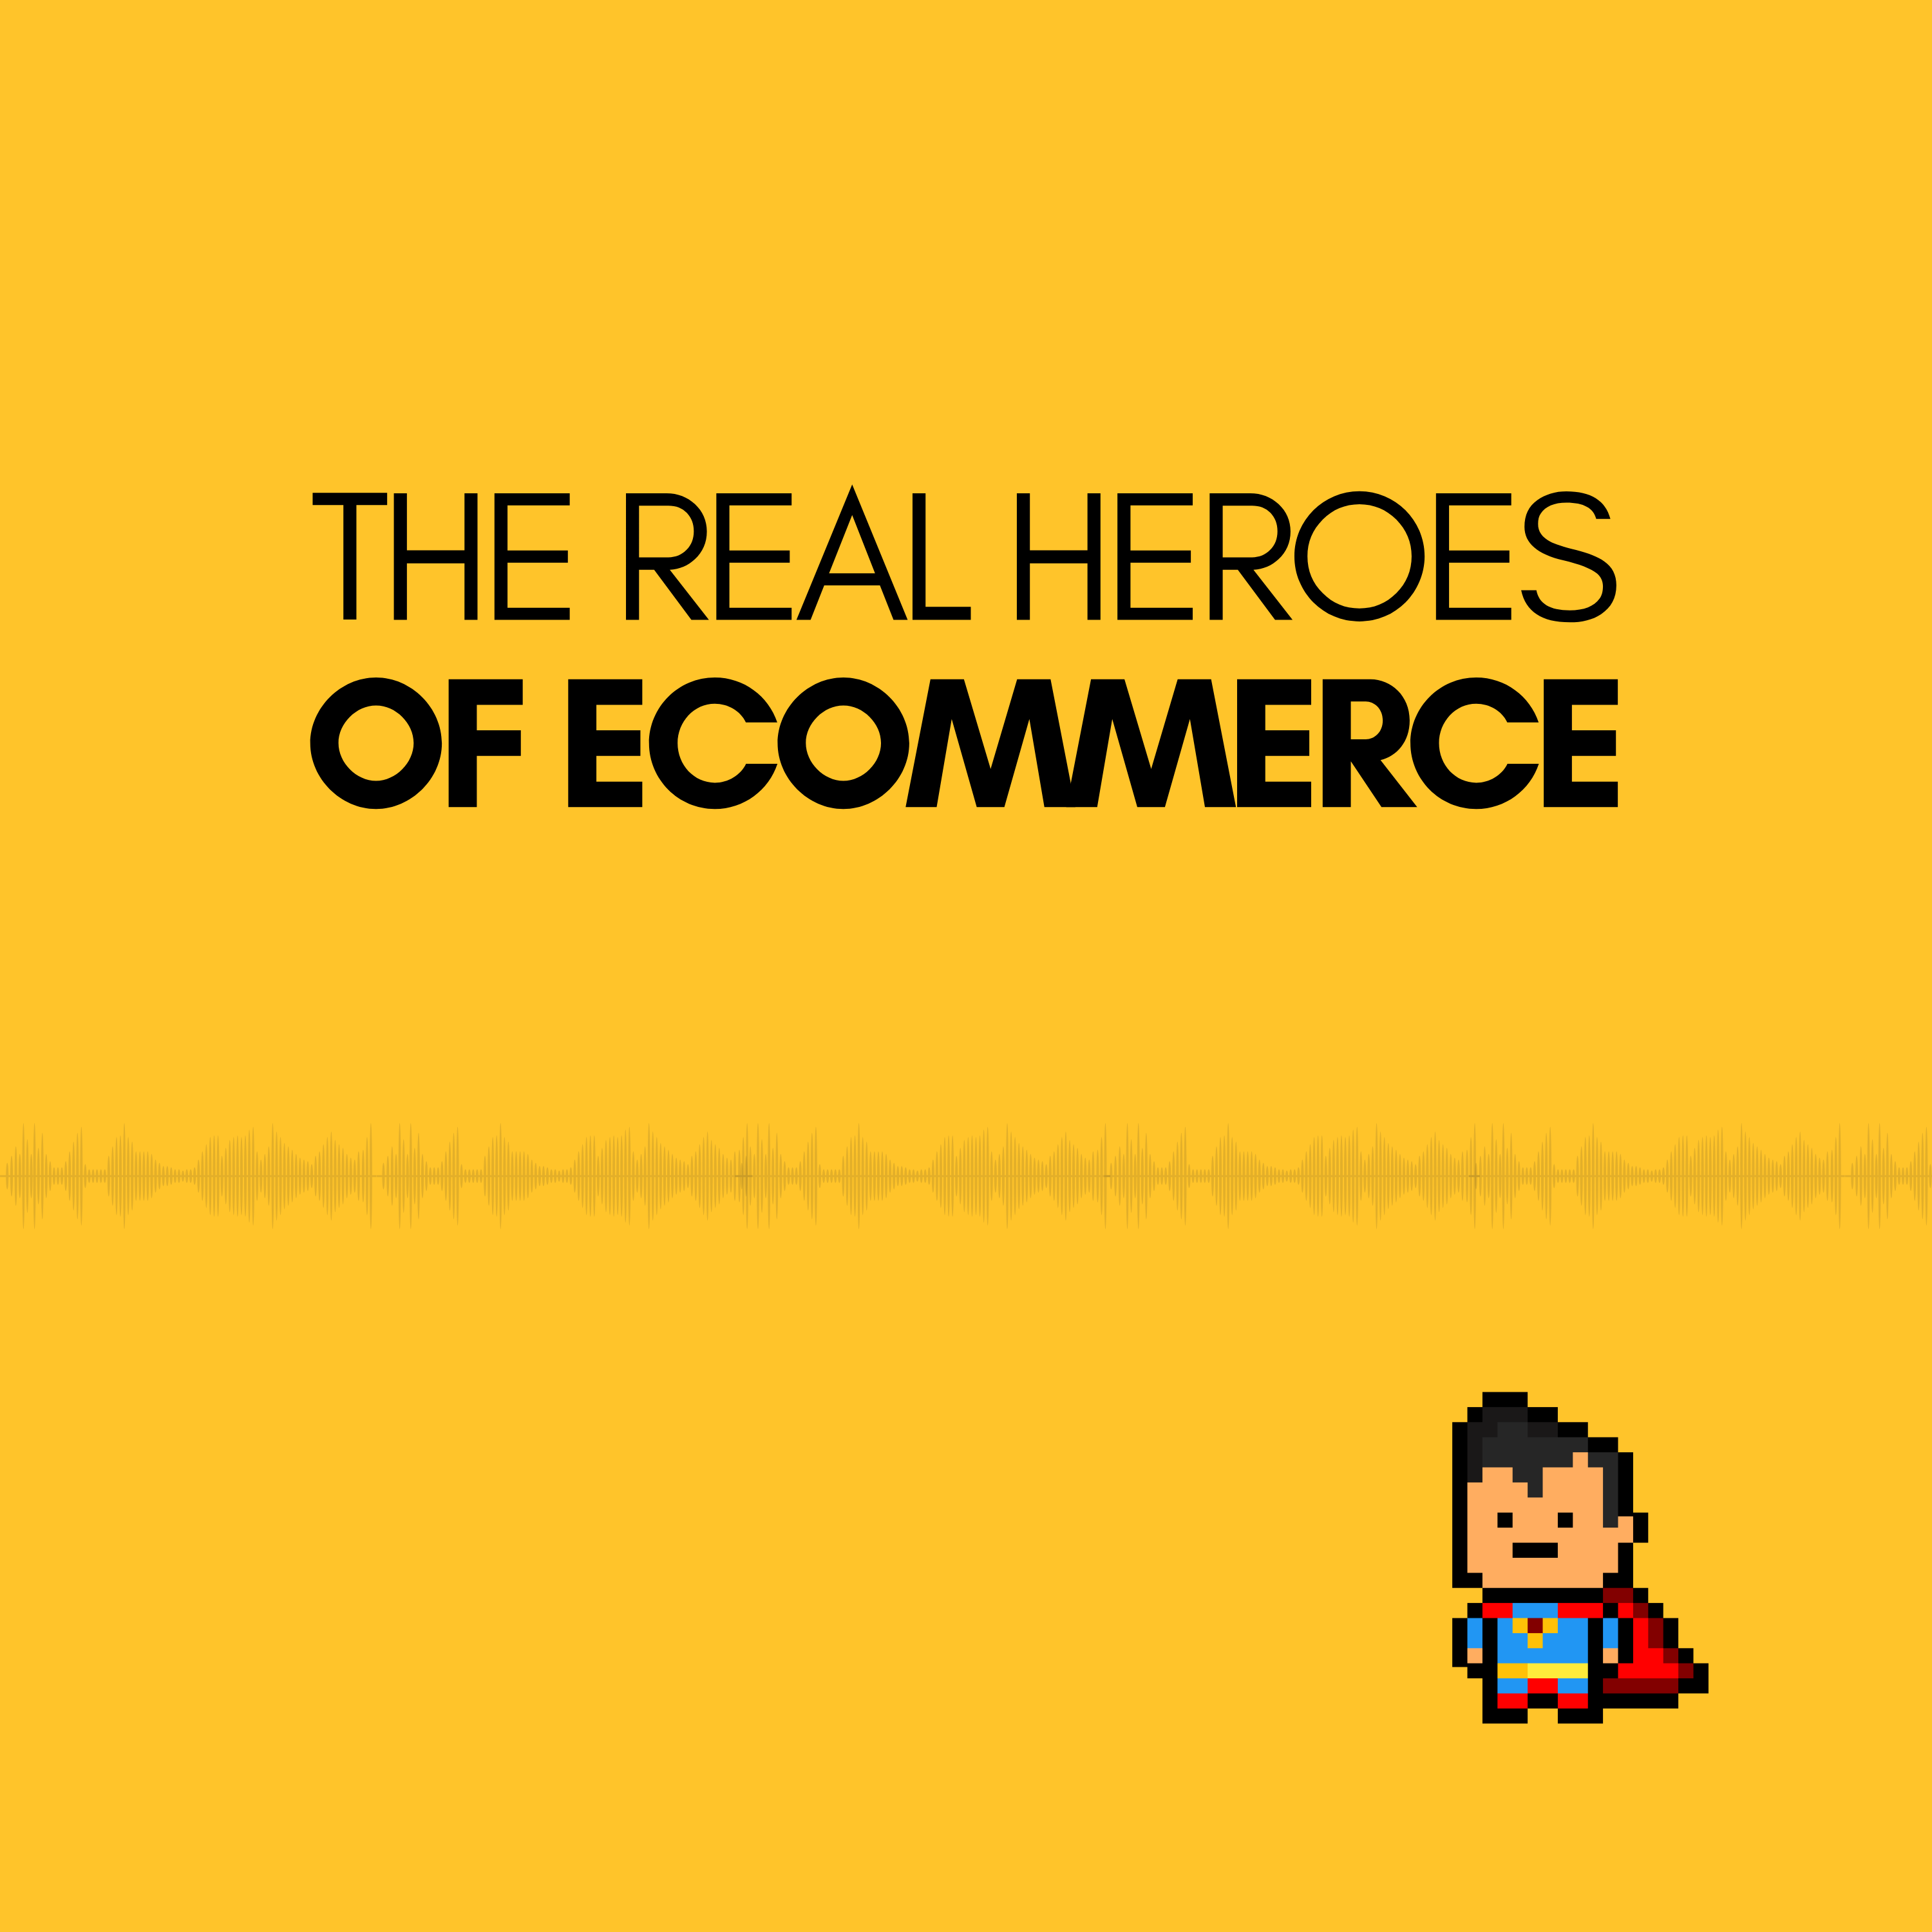 The Real Heroes of Ecommerce